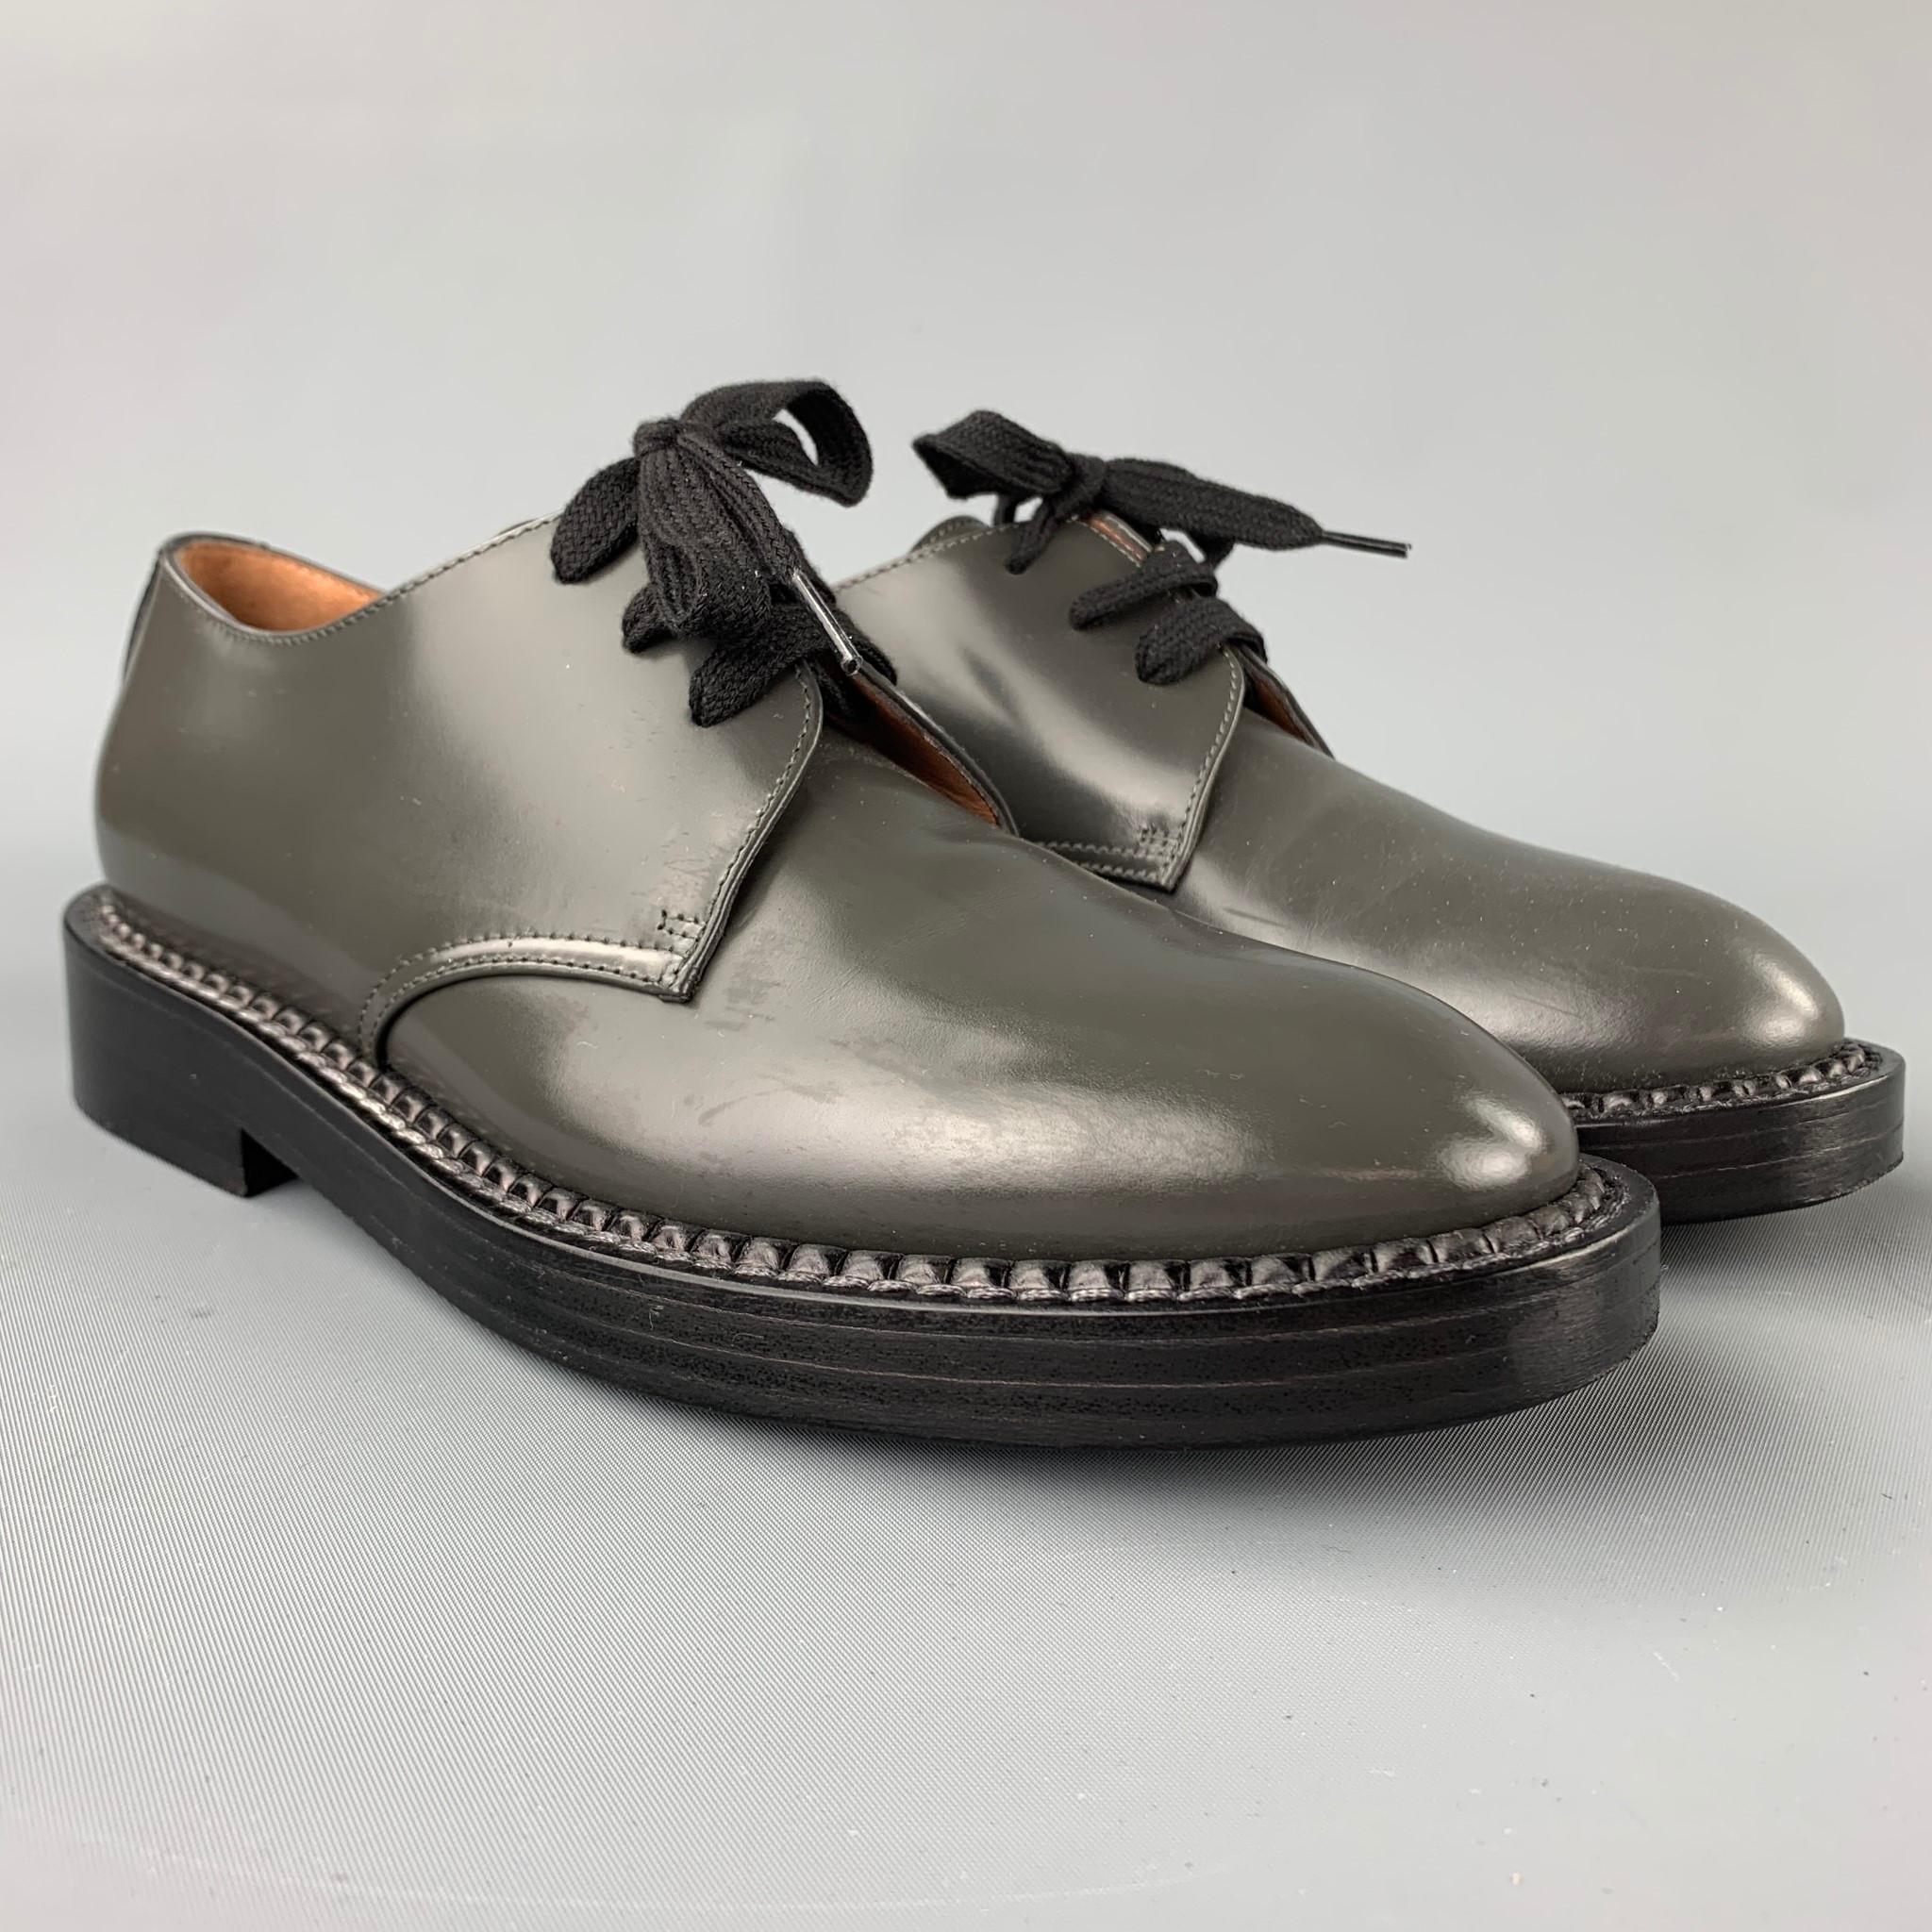 MARNI shoes comes in a slate leather featuring a round toe, thick wooden sole, and a lace up closure. Made in Italy. 

Excellent Pre-Owned Condition.
Marked: EU 36
Original Retail Price: $890.00

Measurements:

10.5 in. x 3.5 in.